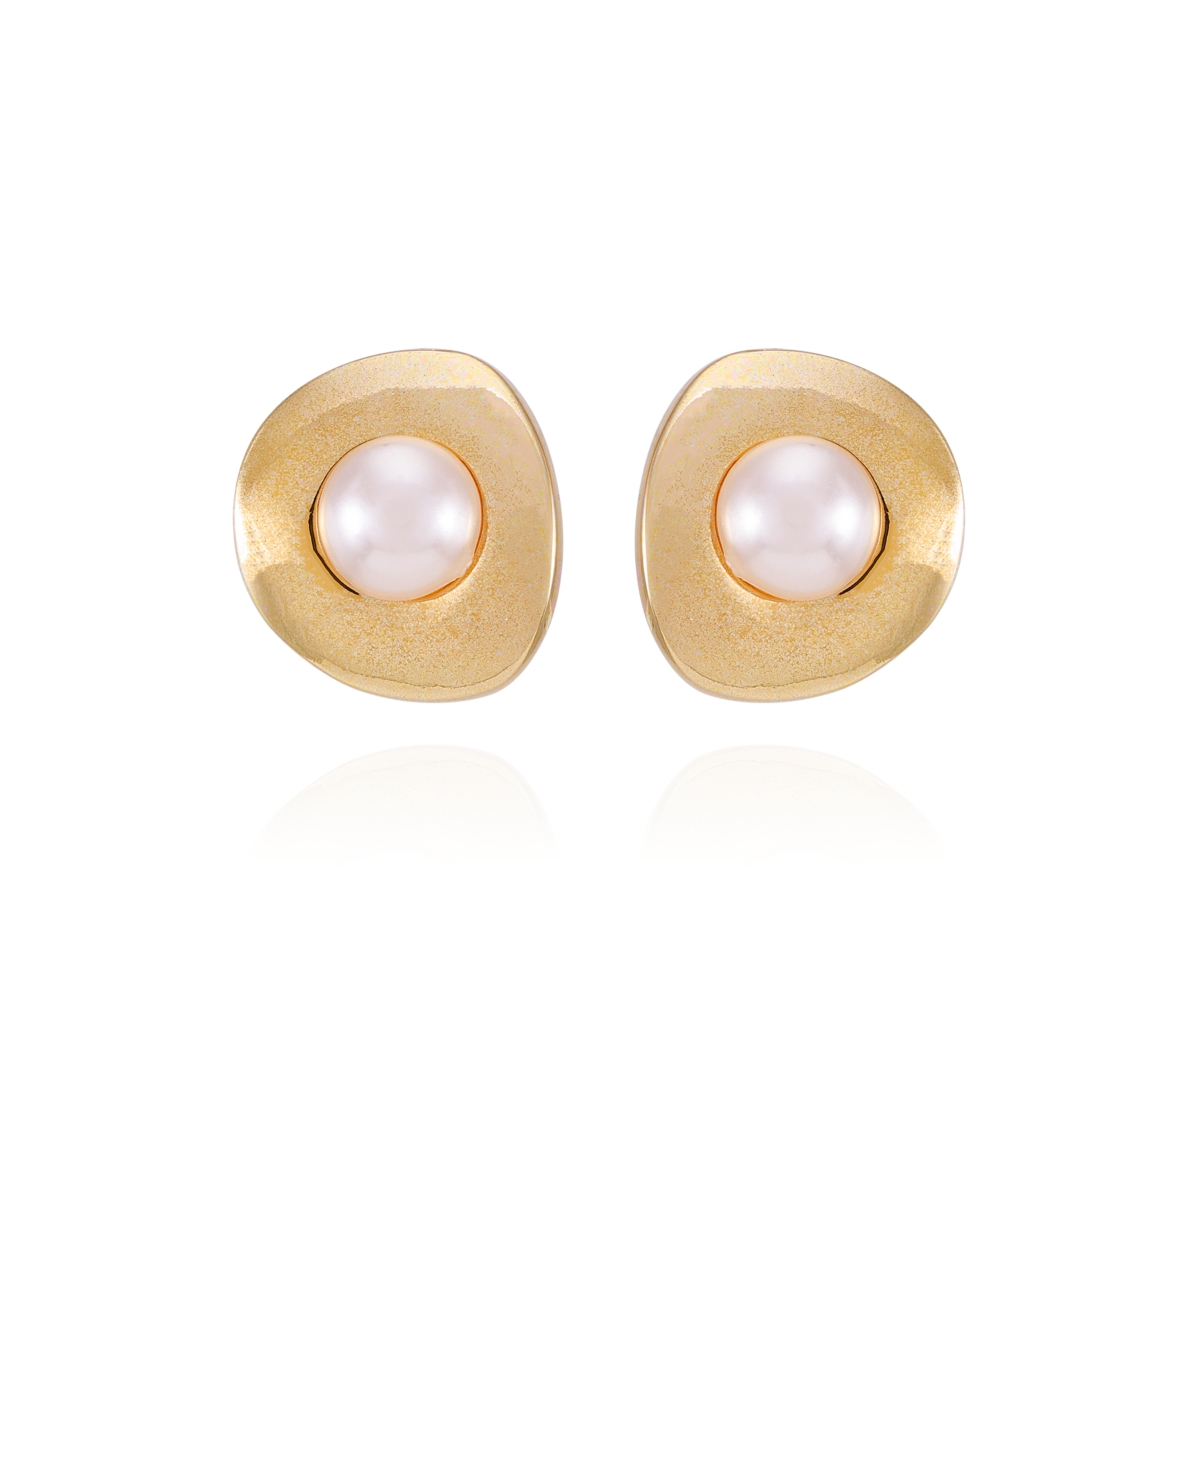 Gold-Tone Imitation Pearl Clip On Button Earrings - Gold